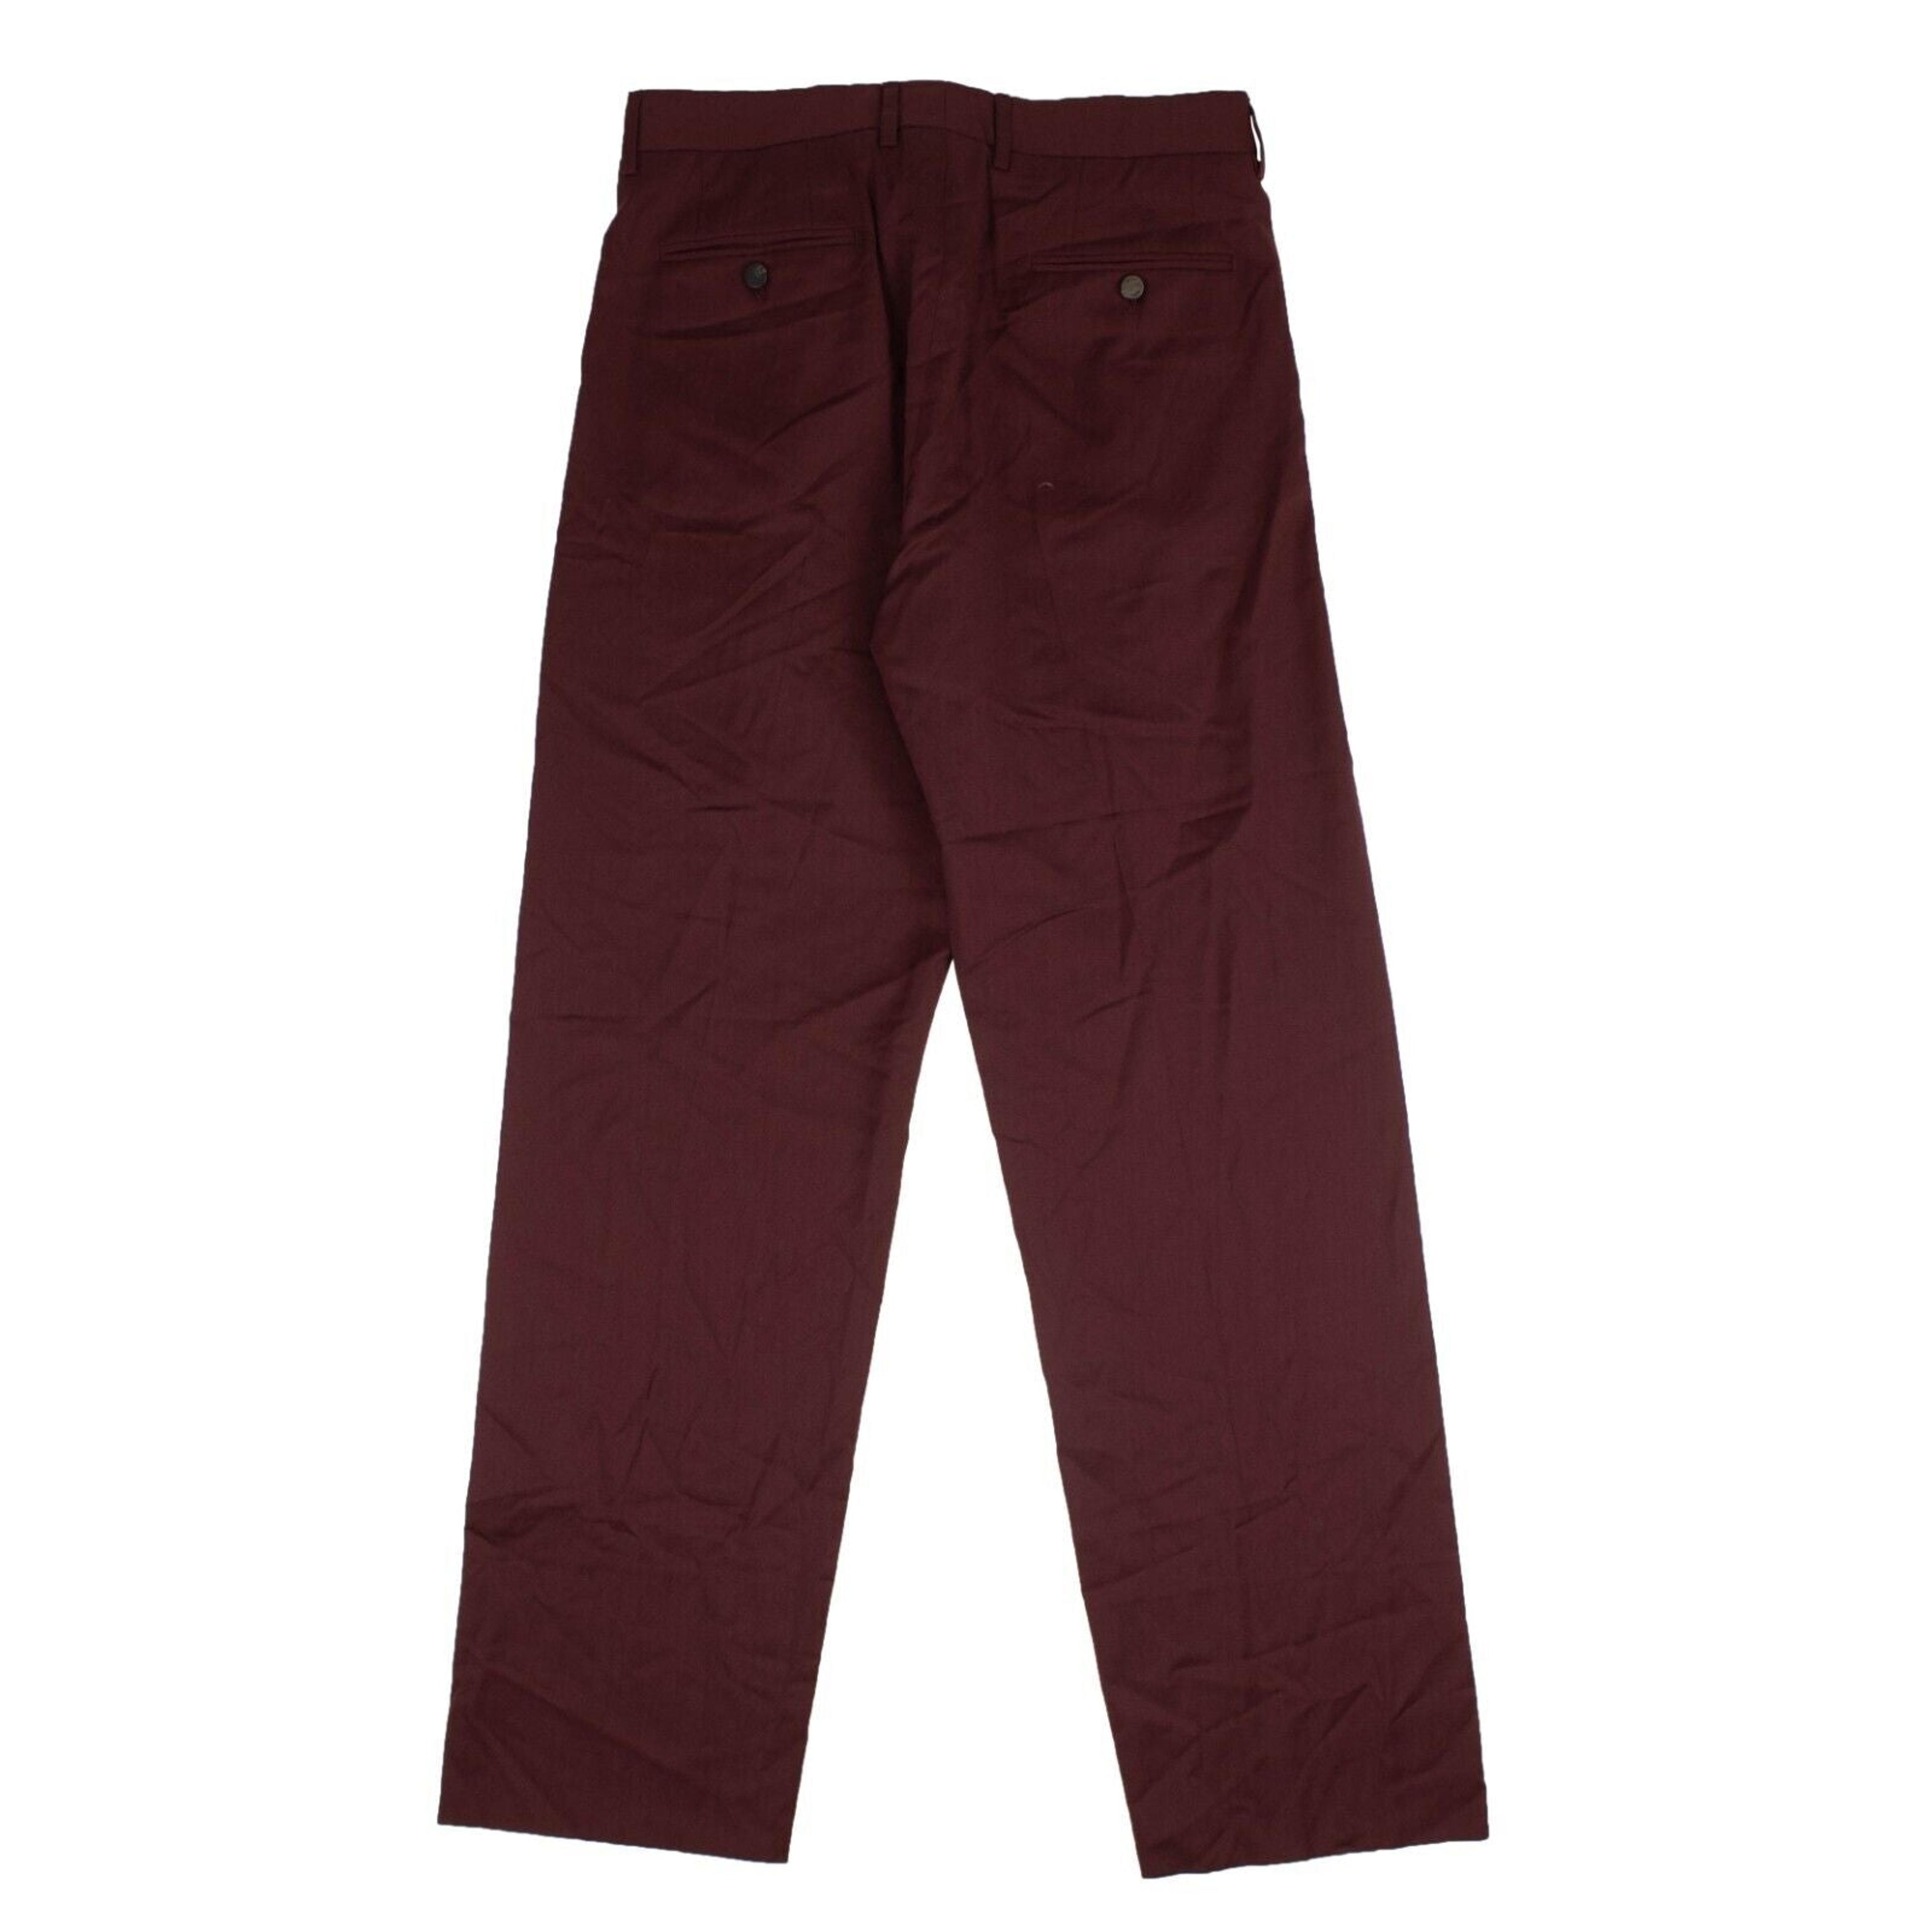 Alternate View 3 of Burgundy Oversized Suit Pants